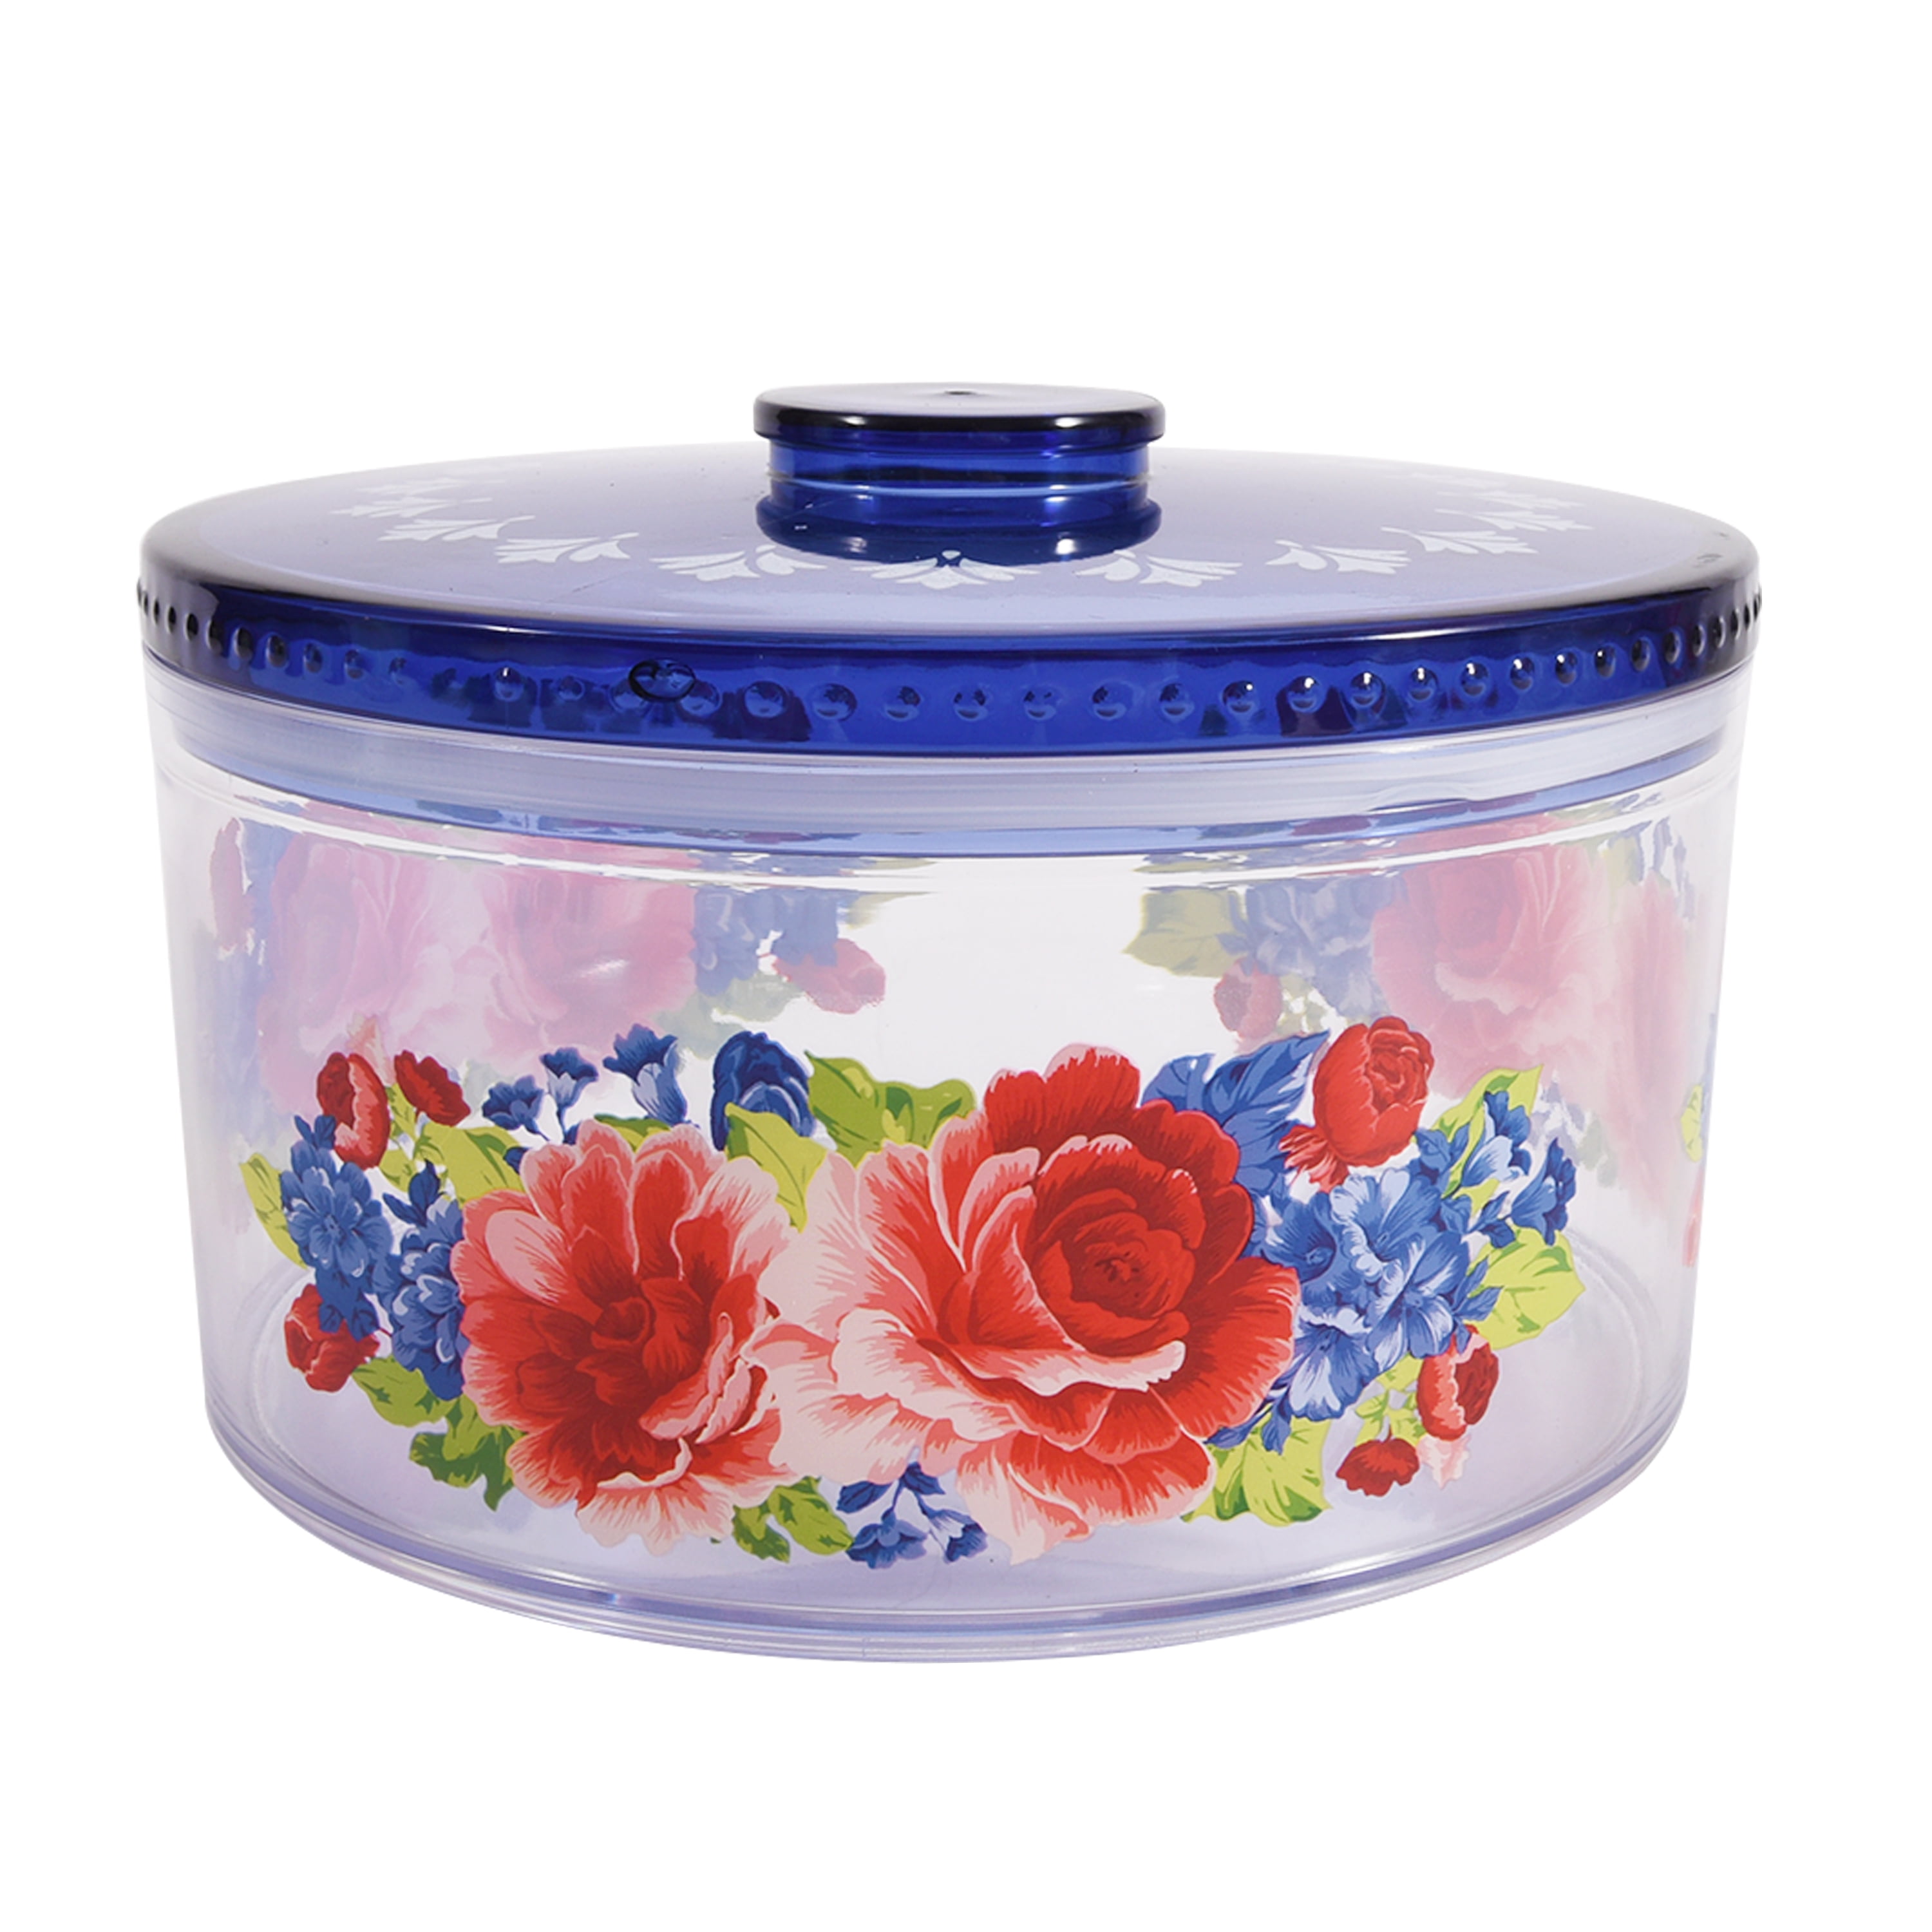 NWT Pioneer Woman BIRTHDAY FLORAL CANDY JAR Container w/ Lid